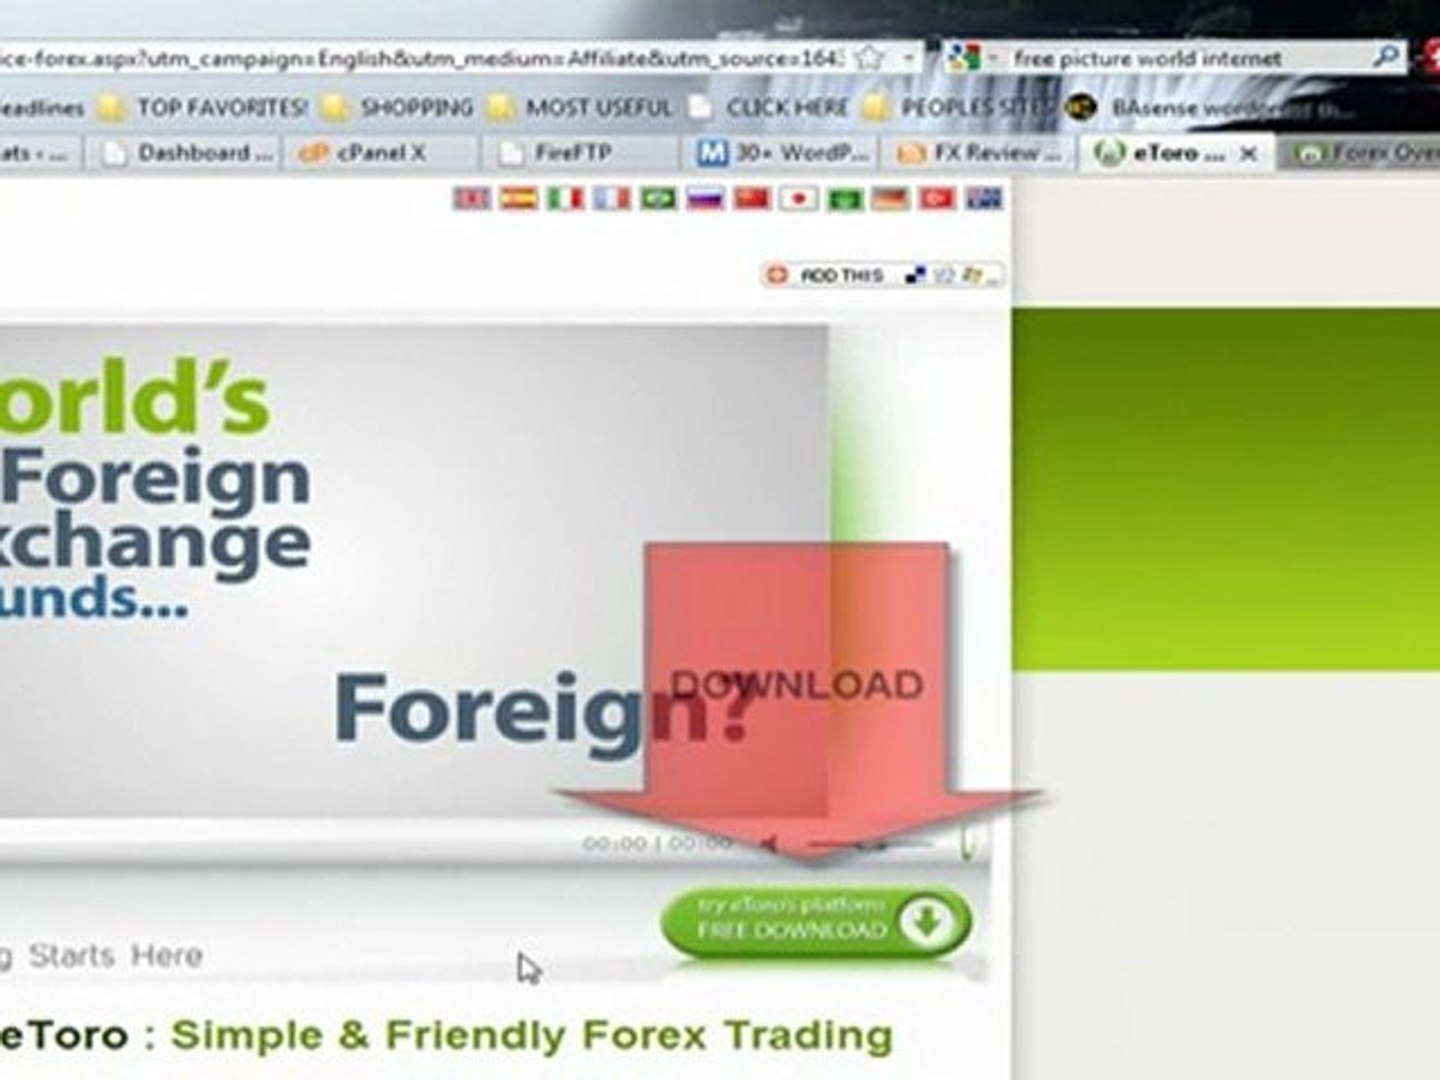 Learn Forex Tarding Online Forex Trading For Newbies - 